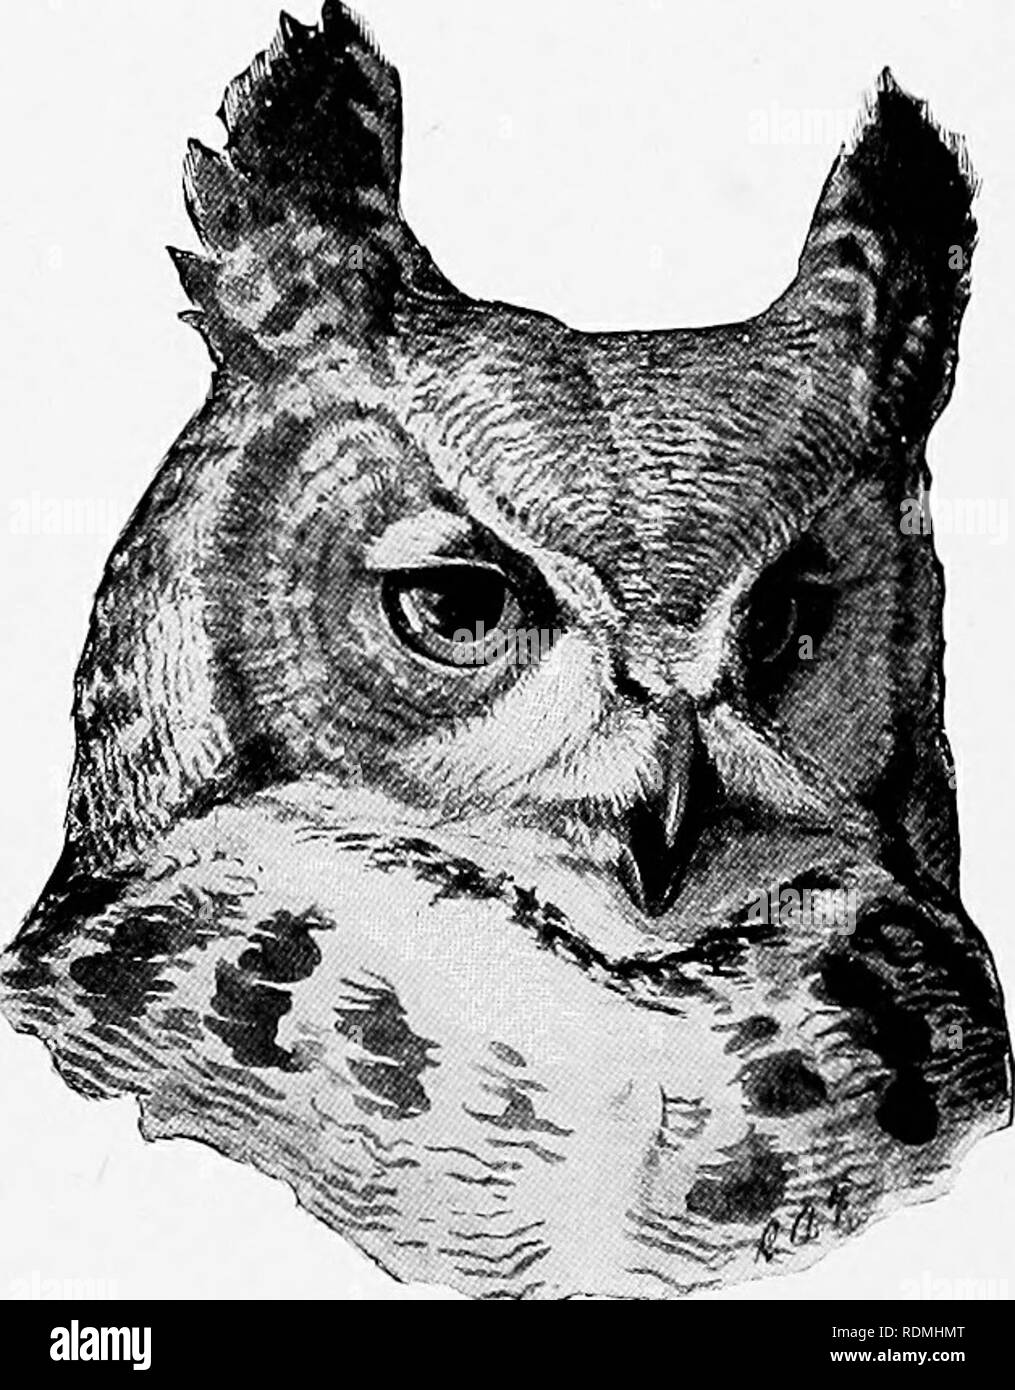 . Wild animals of Glacier National Park. The mammals. Glacier National Park (Agency : U. S. ); Mammals; Birds. 156 WILD AN'IMALS OF GLACIER KATIONAL PARK. MacFaklake Screech Owl: Otiis cislo macfarlanel.—A mounted specimen of the familiar little horned screech owl from 7-J to 10 inches long may be seen at Lewis's. xVs it is an owl of the low coimtry, its quavering crj^ should be listened for at night hy campers along the edges of the park. &quot;Western Horned Owl: BuIjo virginianus occidentalis.—The great liorned owl should be looked for in the more open parts of the park. Its nesls may be fo Stock Photo